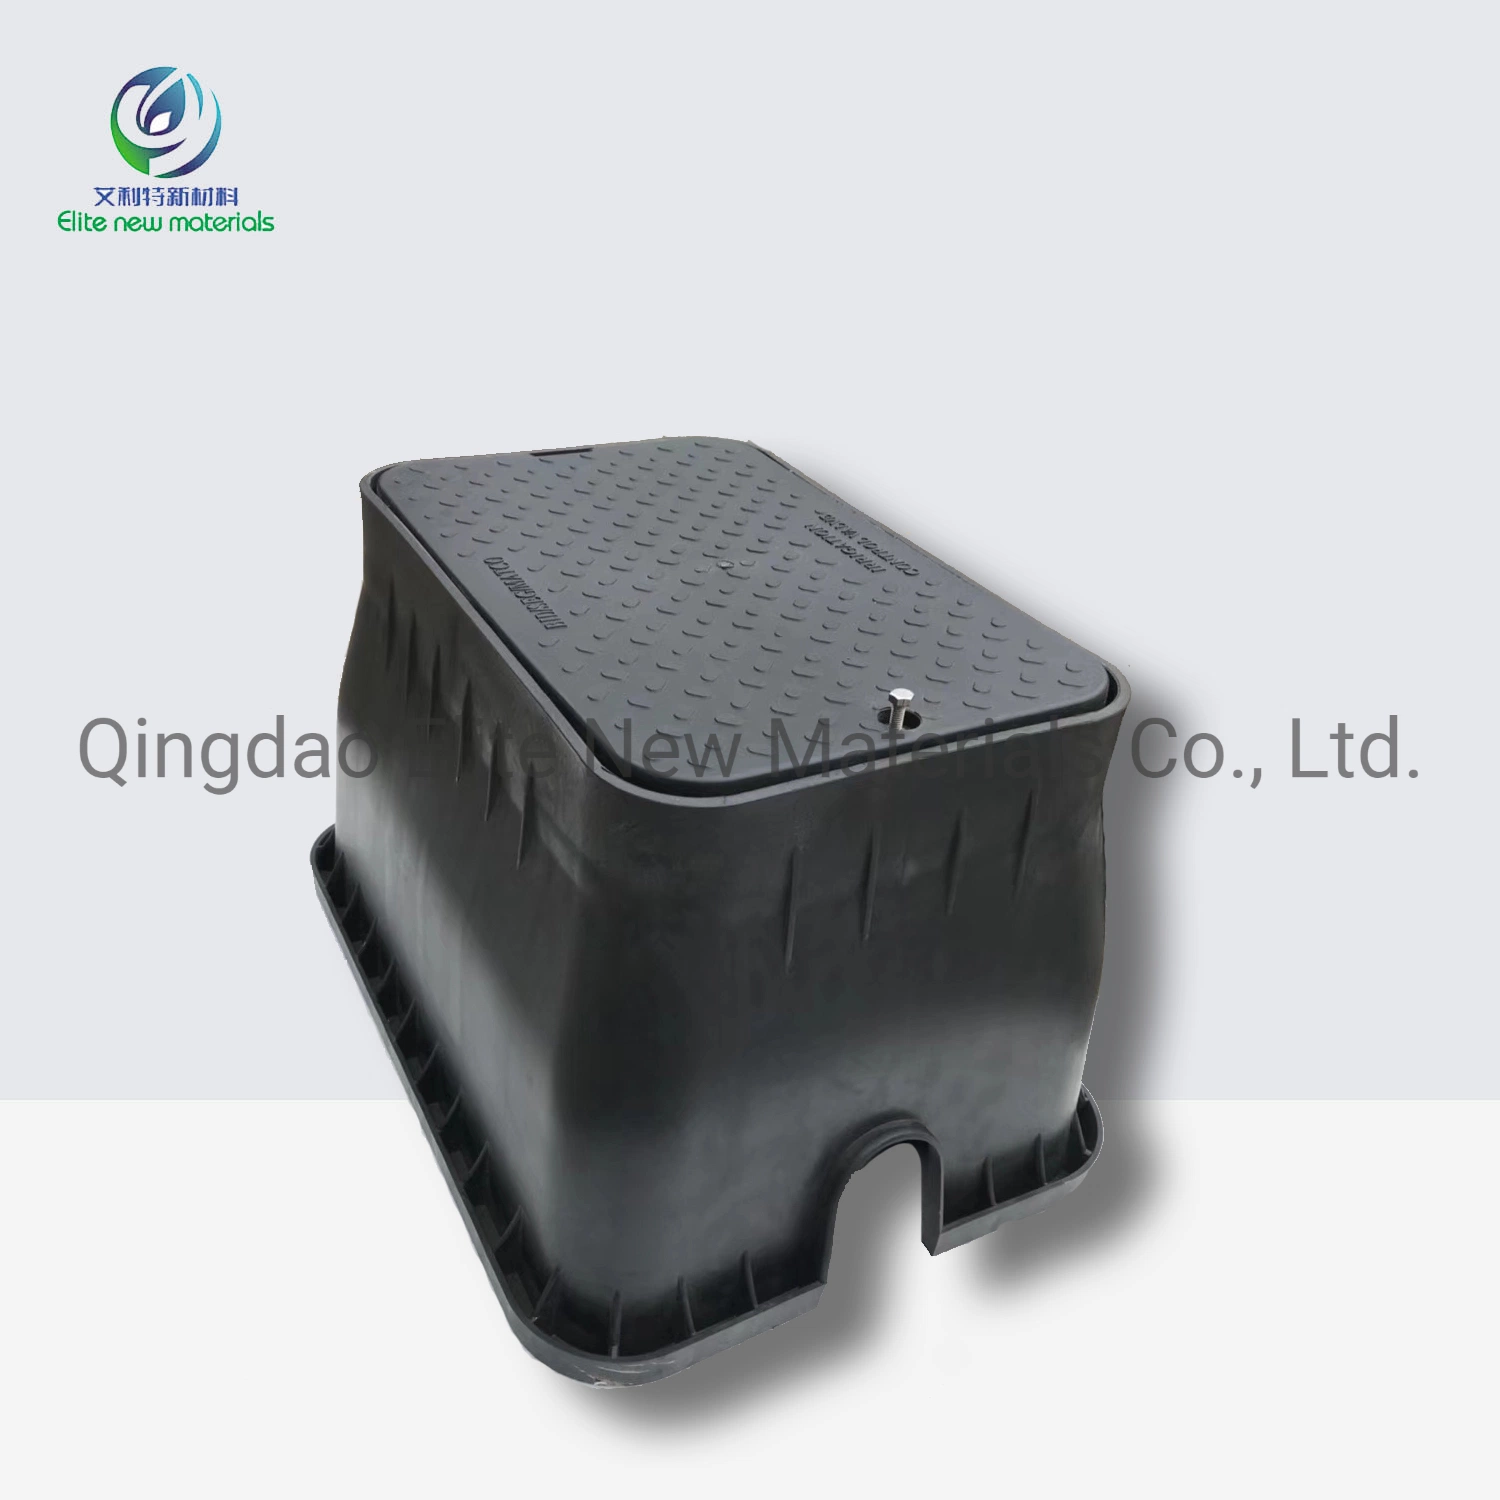 Elite Plastic Water Meter Box Manufacturer with All Required Fittings for Easy Installation and Maintenance of Water Meter From China